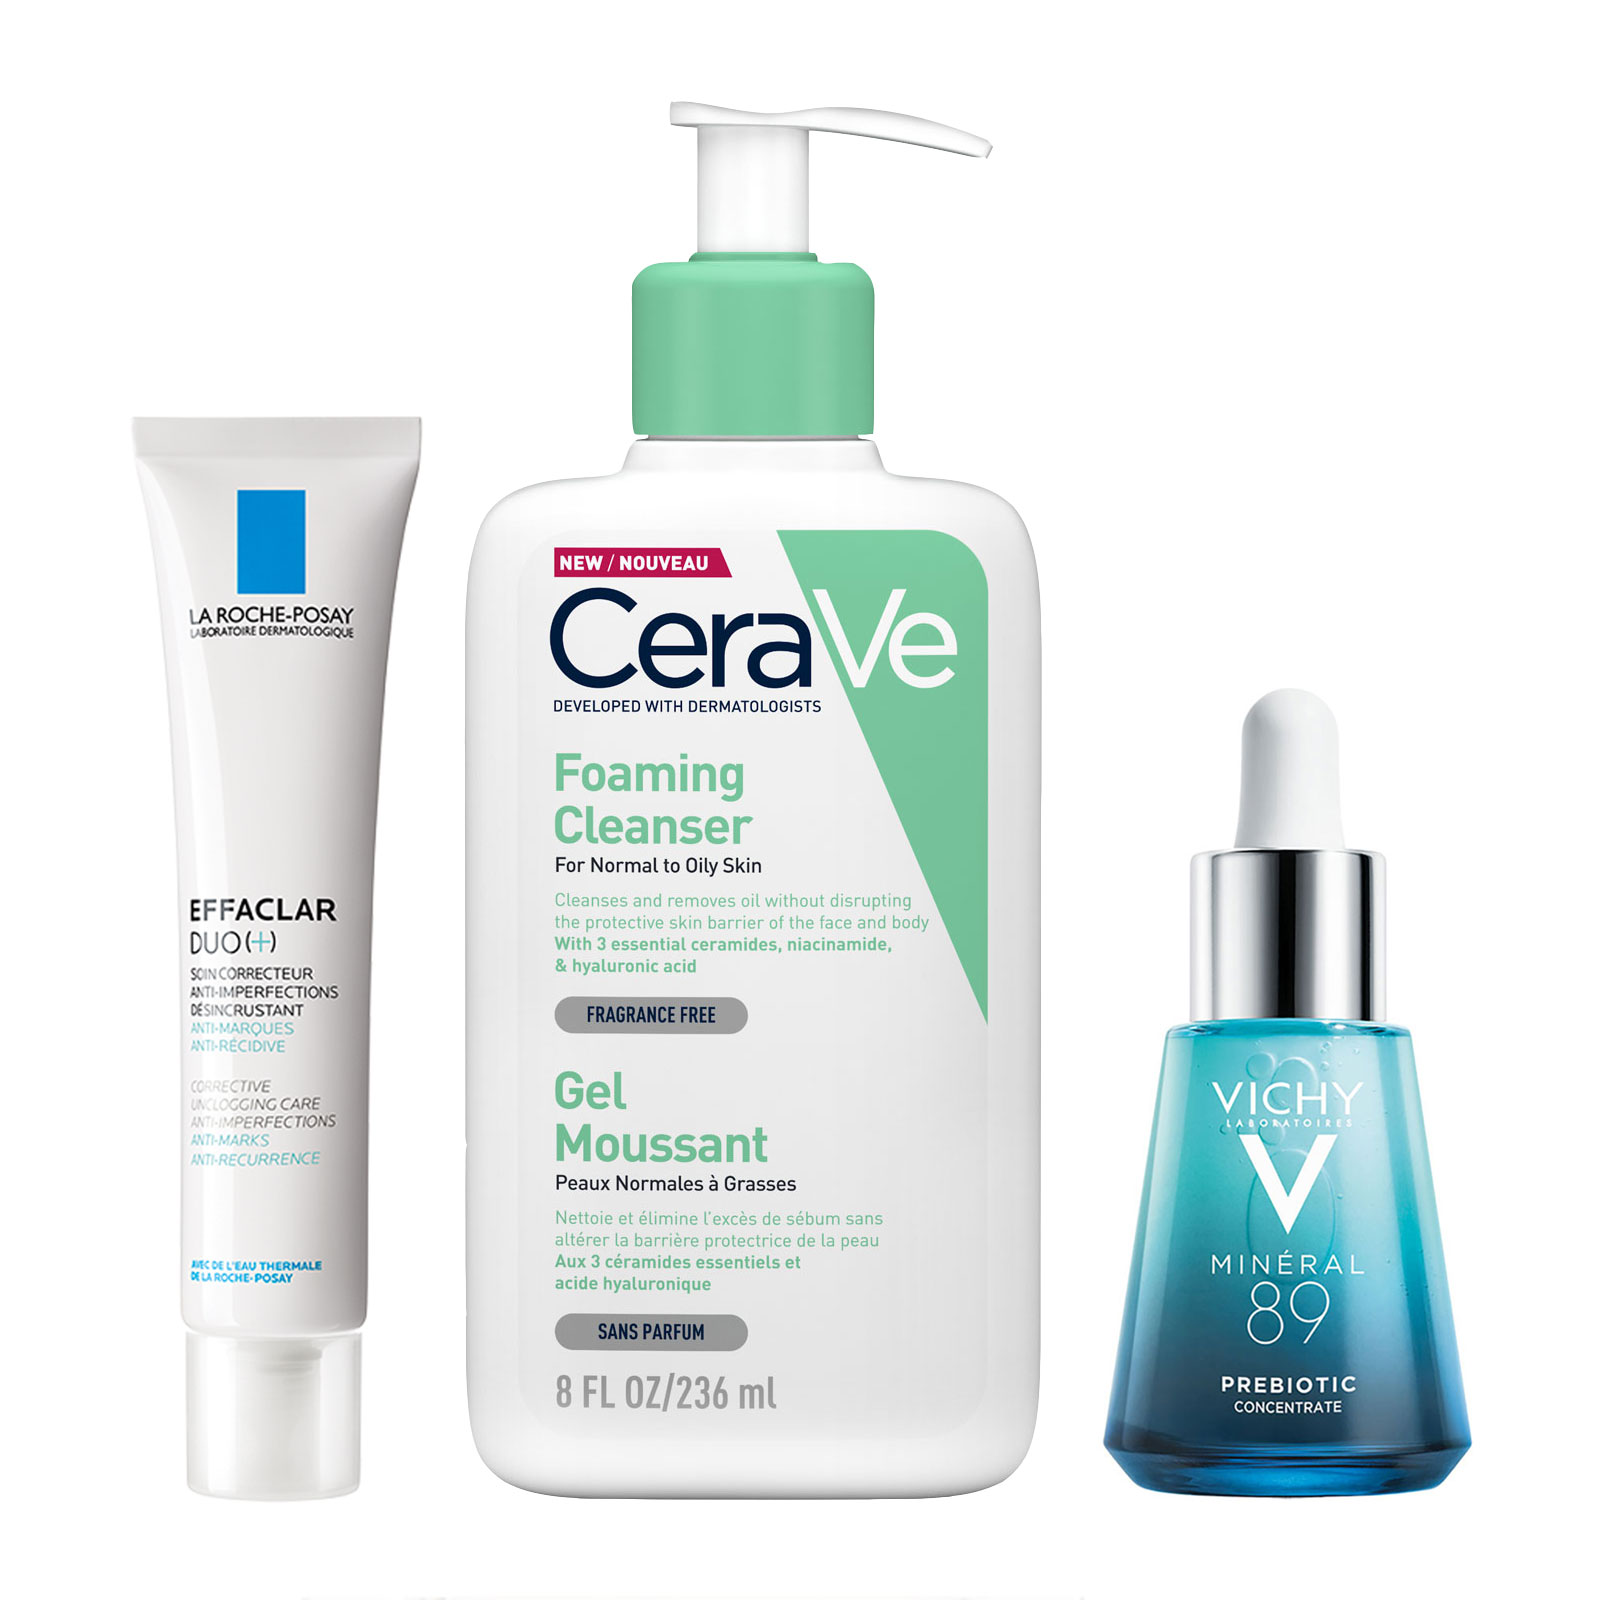 La Roche-Posay x Vichy x CeraVe 3-Step Calming & Clarifying Daily Routine